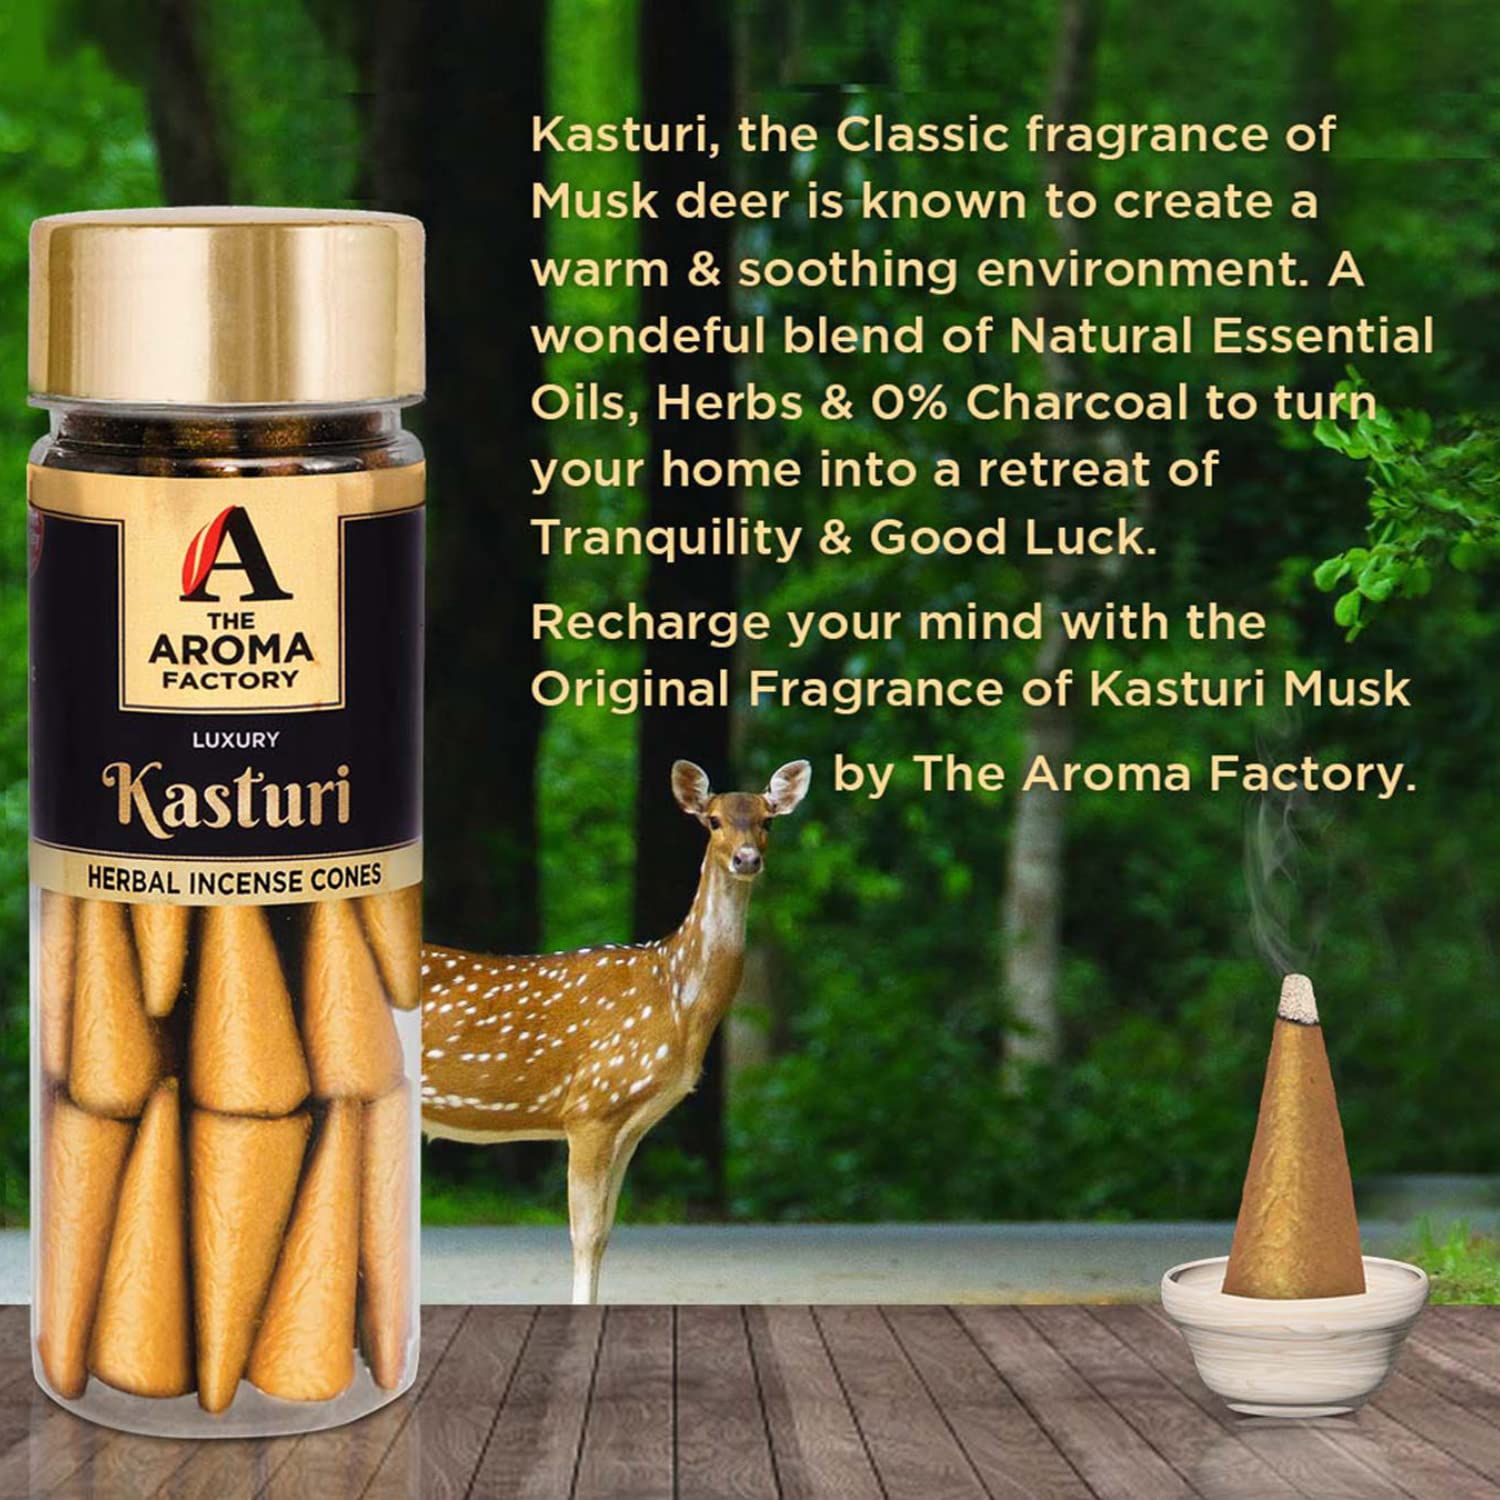 The Aroma Factory Incense Dhoop Cone, Kasturi (100% Herbal & 0% Charcoal) 3 Bottles x 30 Cones